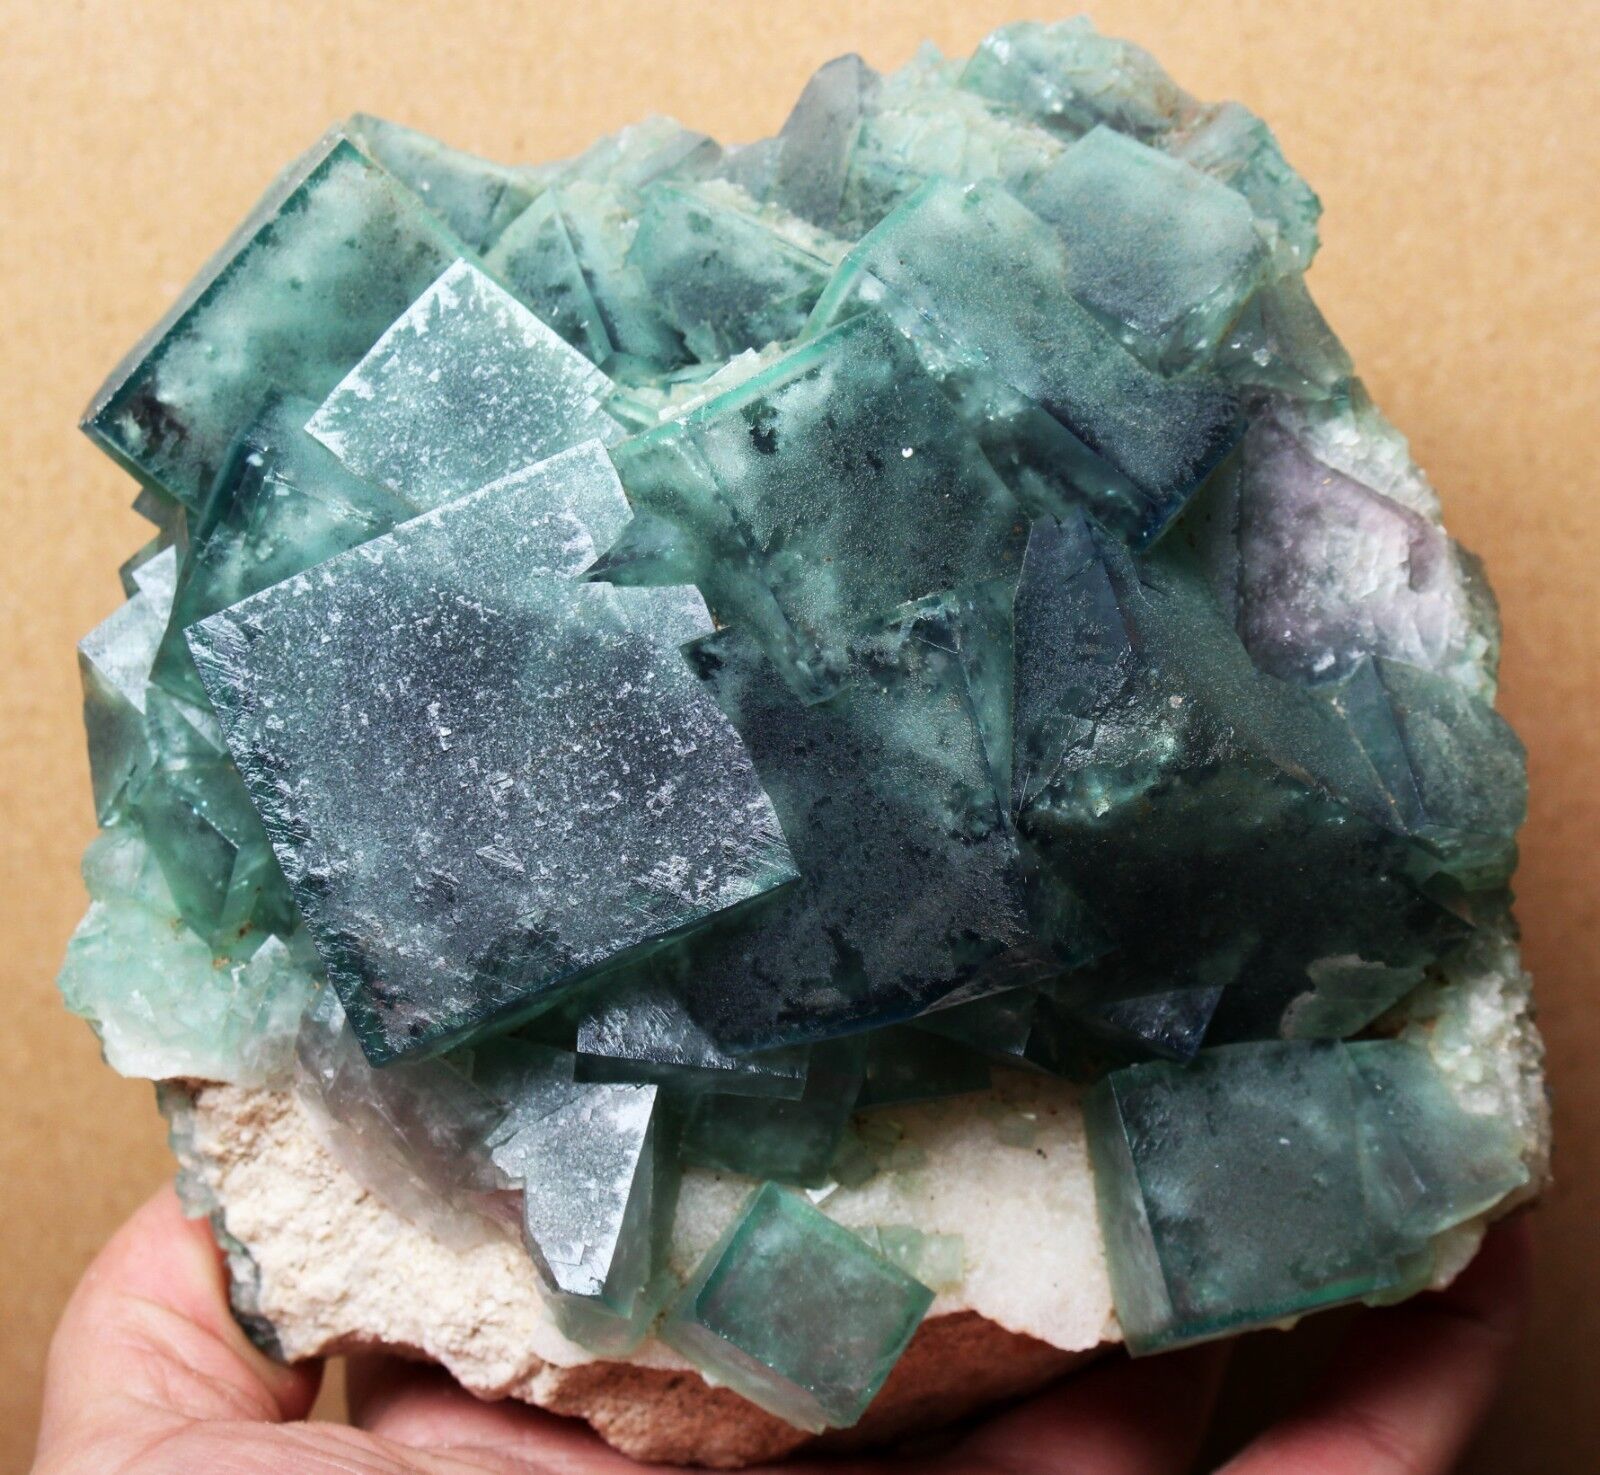 Rare Larger Particles Transparent Green Cube Fluorite Crystal Mineral Specimen